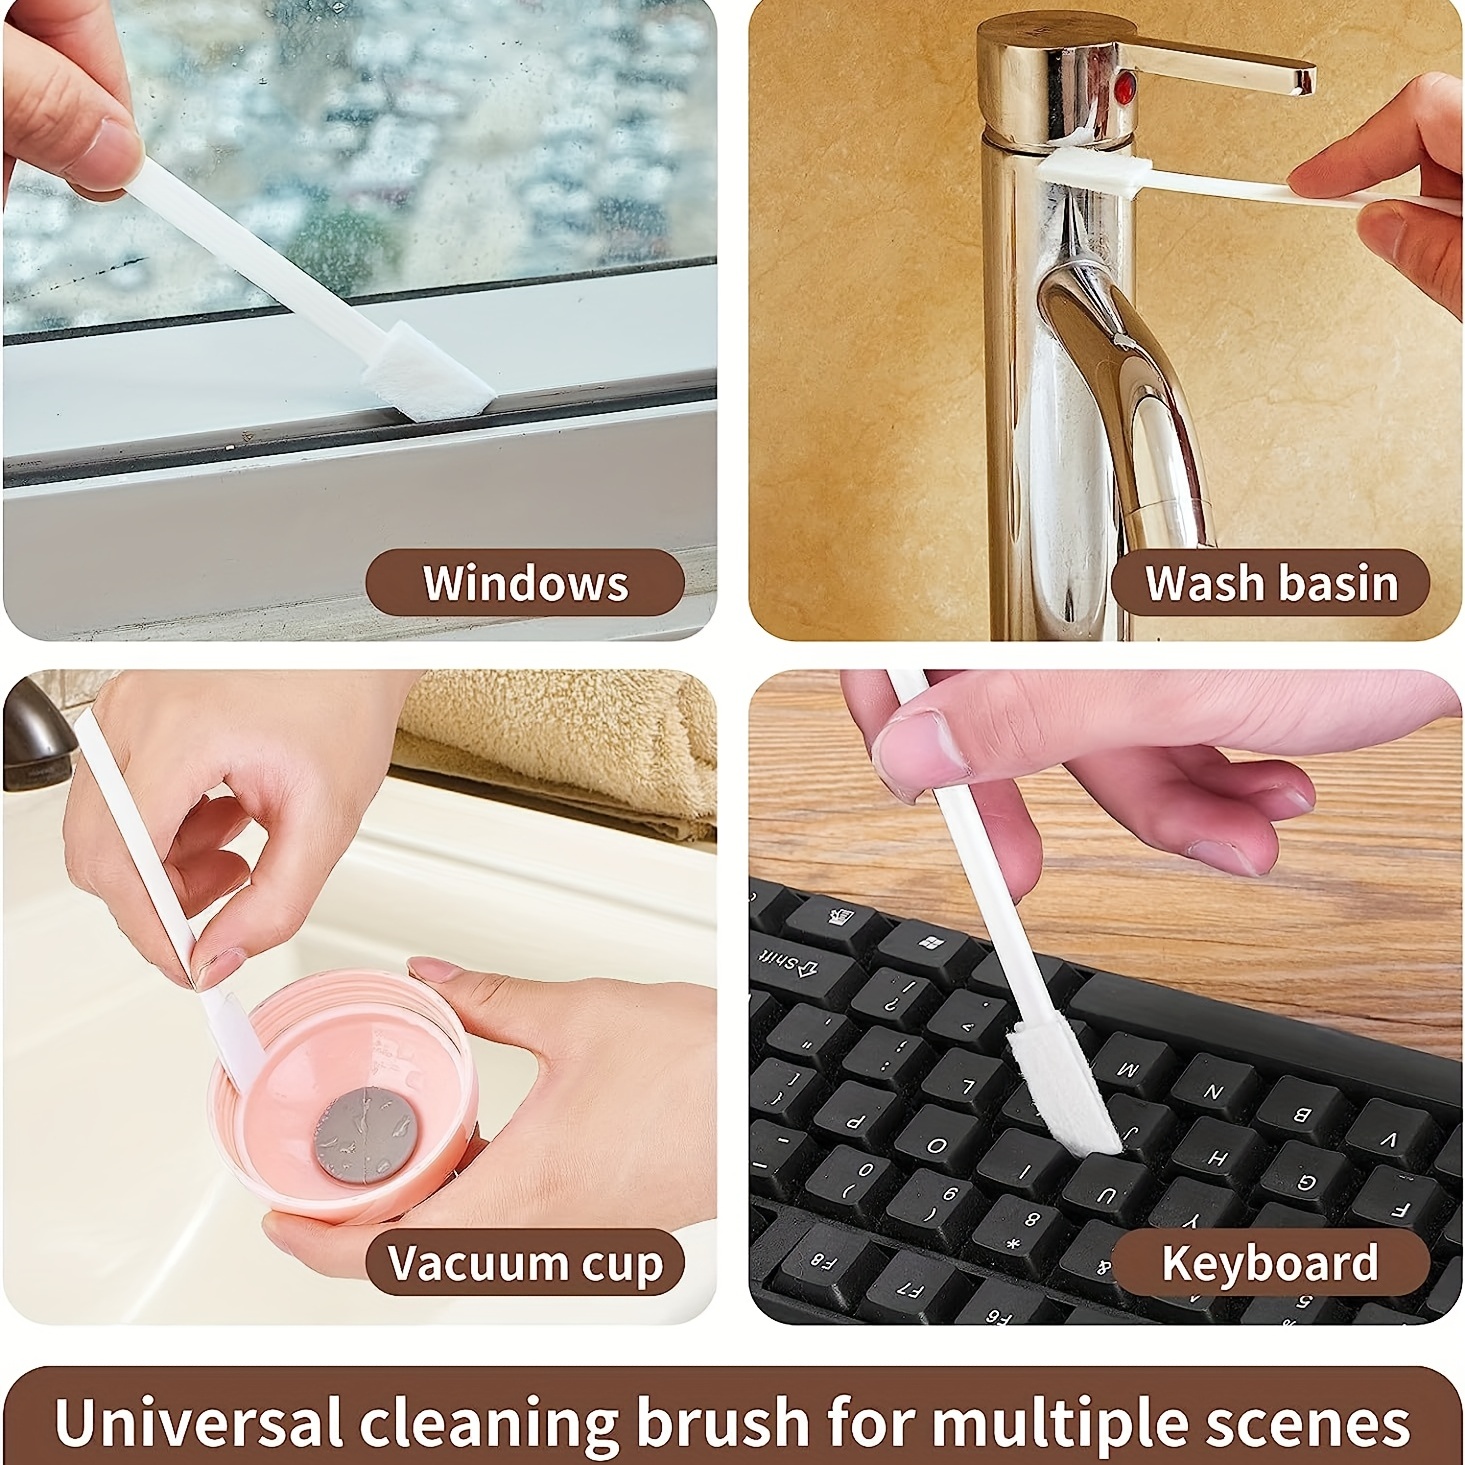  8pcs Small Household Cleaning Brushes, Small Cleaning Brush Set  Detail Cleaning Brush Crevice Cleaning Tool for Window Toilet Keyboard  Humidifier Bottle Small Space Gaps Corner : Home & Kitchen